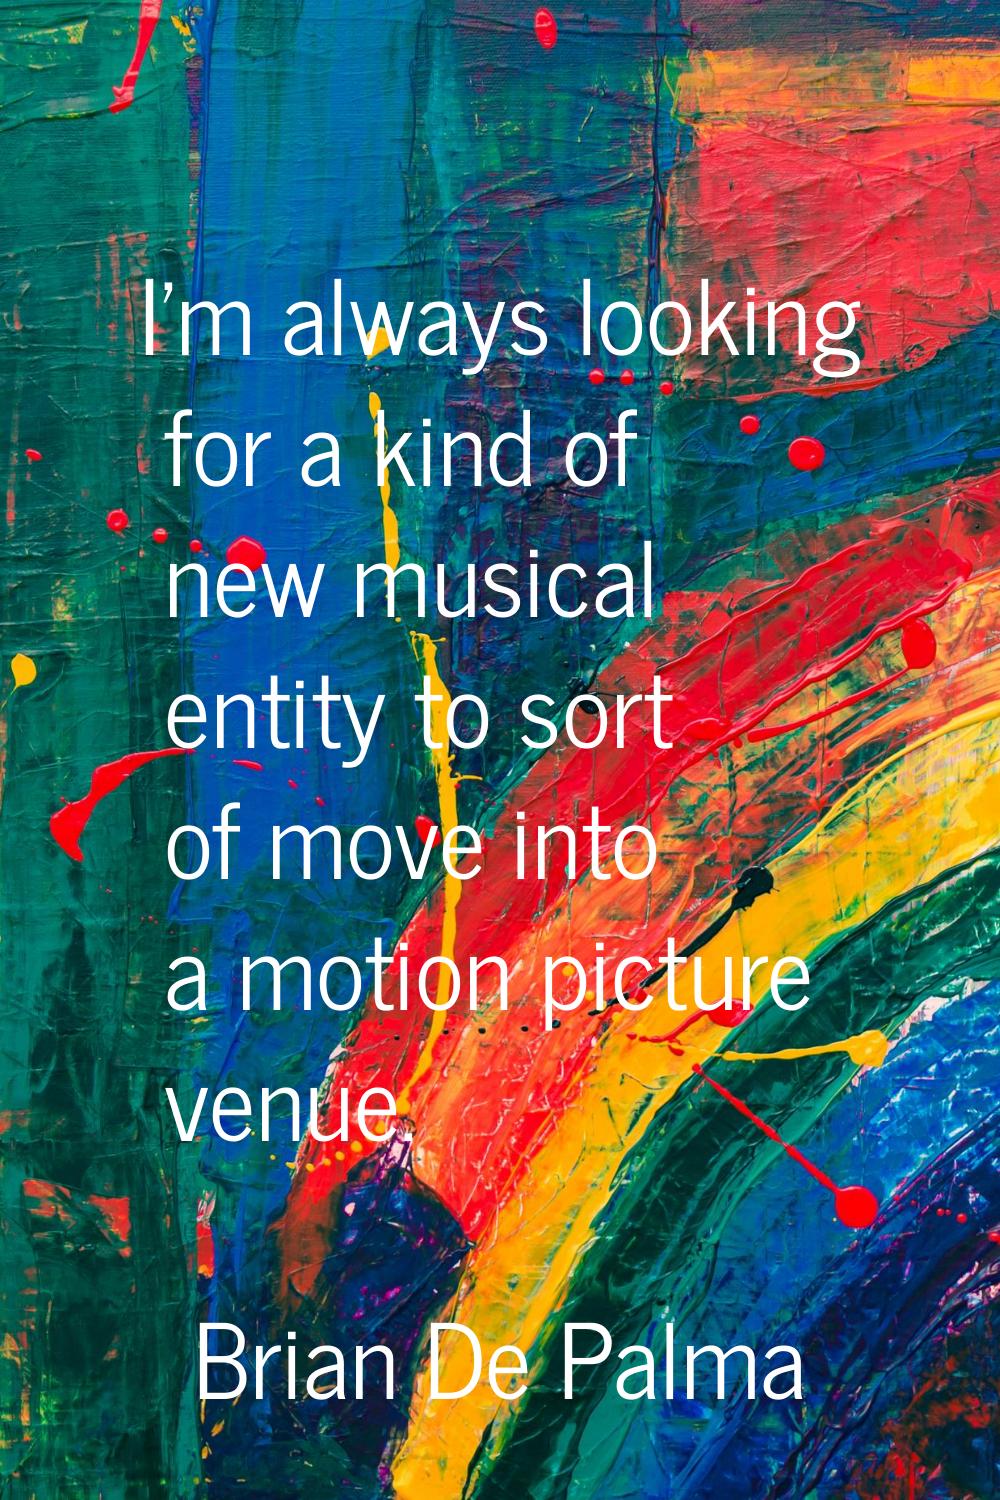 I'm always looking for a kind of new musical entity to sort of move into a motion picture venue.